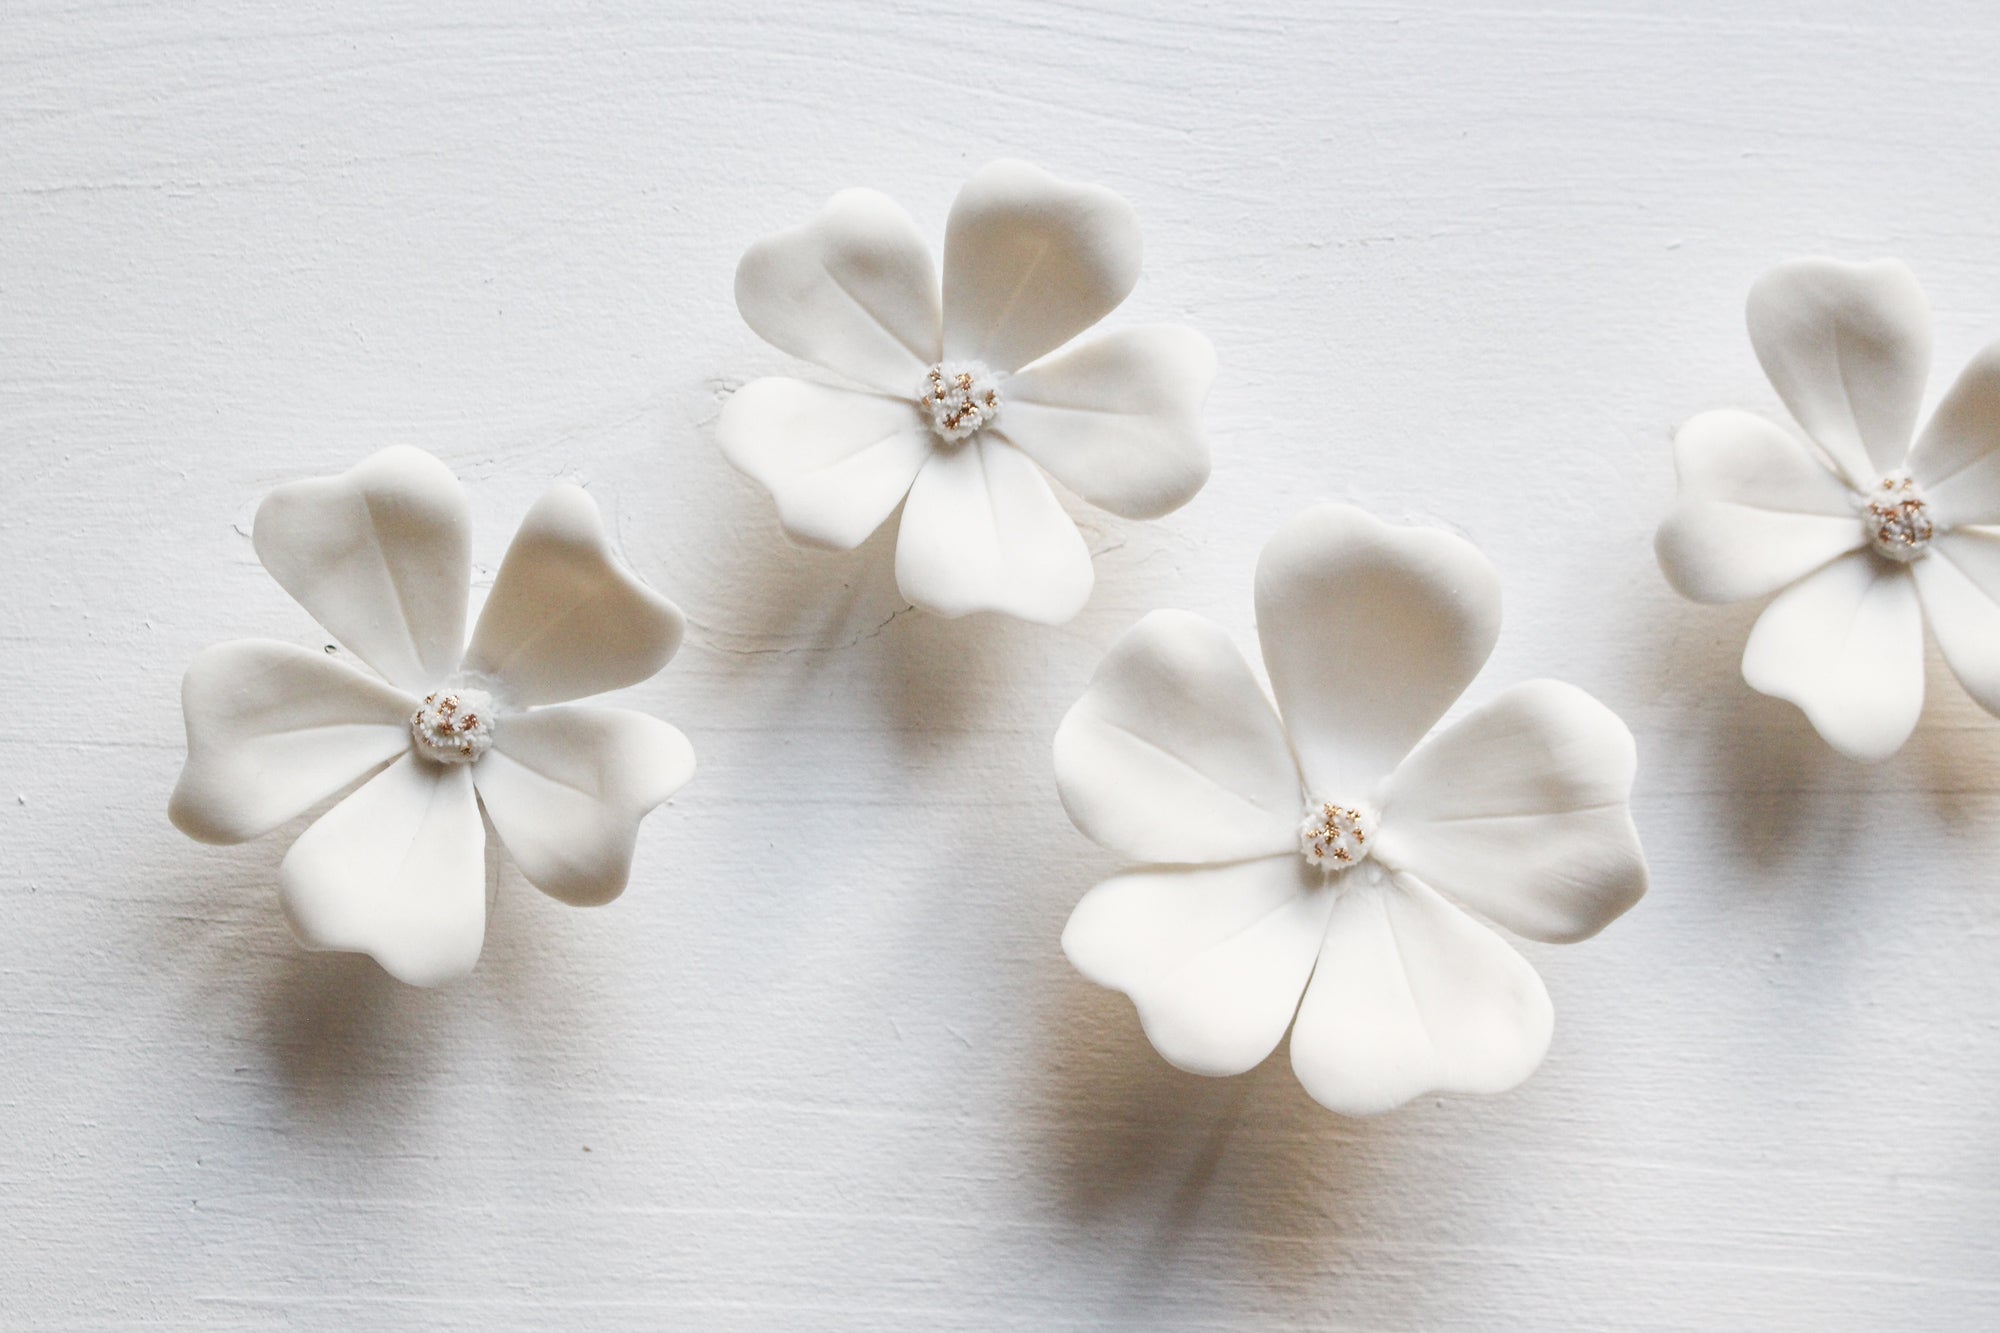 Wall Decor of Porcelain Flowers by Alain Granell